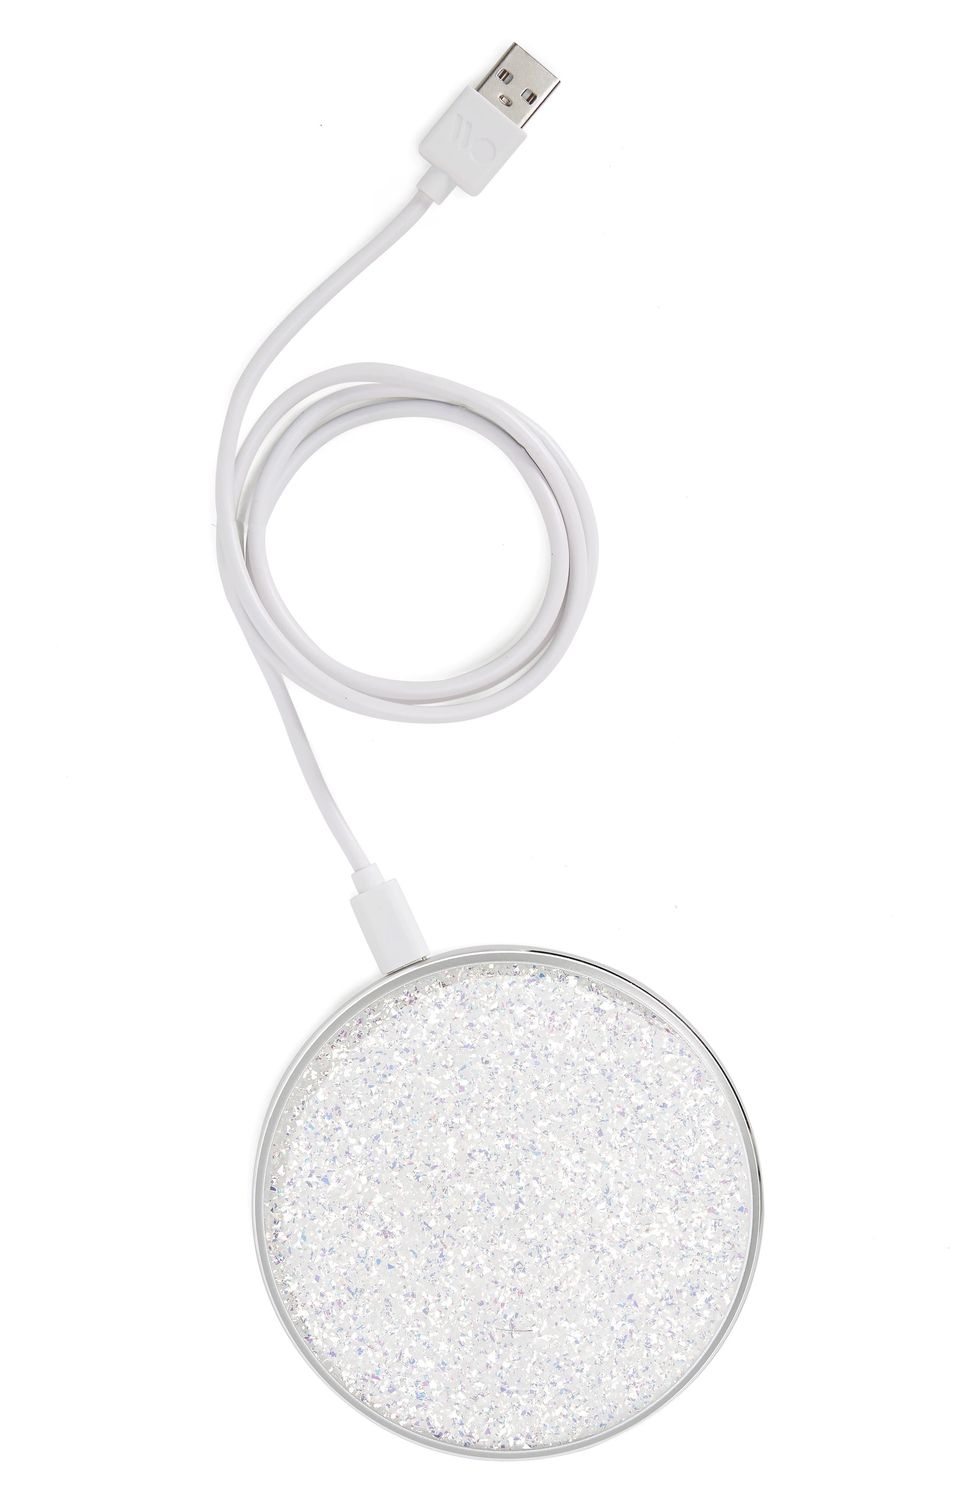 Twinkle Power Disc Wireless Charger